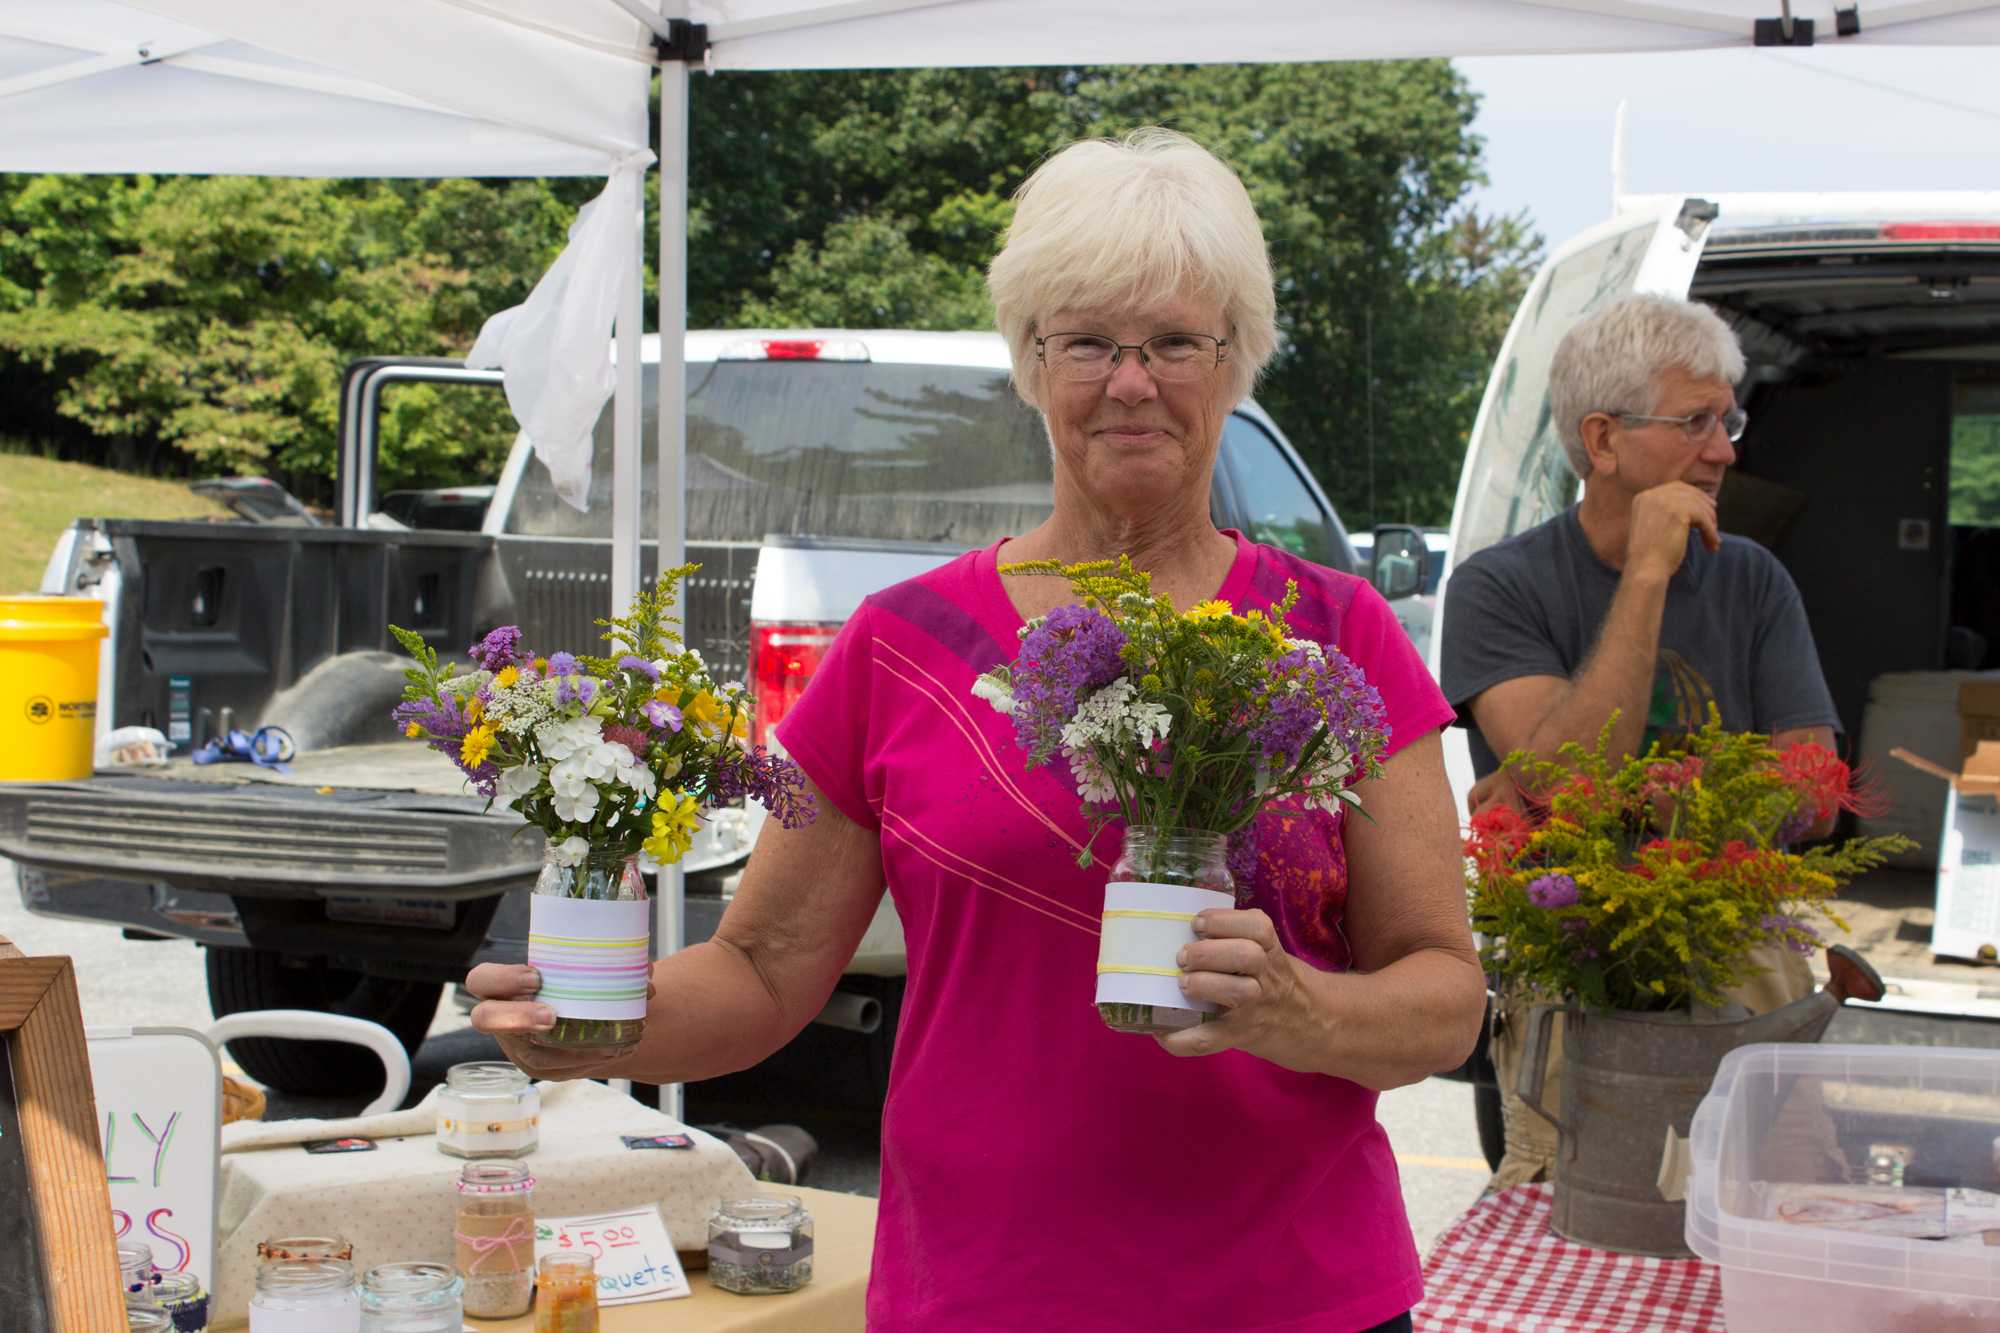 Lori Bryk, mother of Cory Bryk who started New Life Farm in Lenoir, NC helps her son and his family during the Farmers' Market. Bryk passes out a bouquet of flowers to a random person each Saturday.